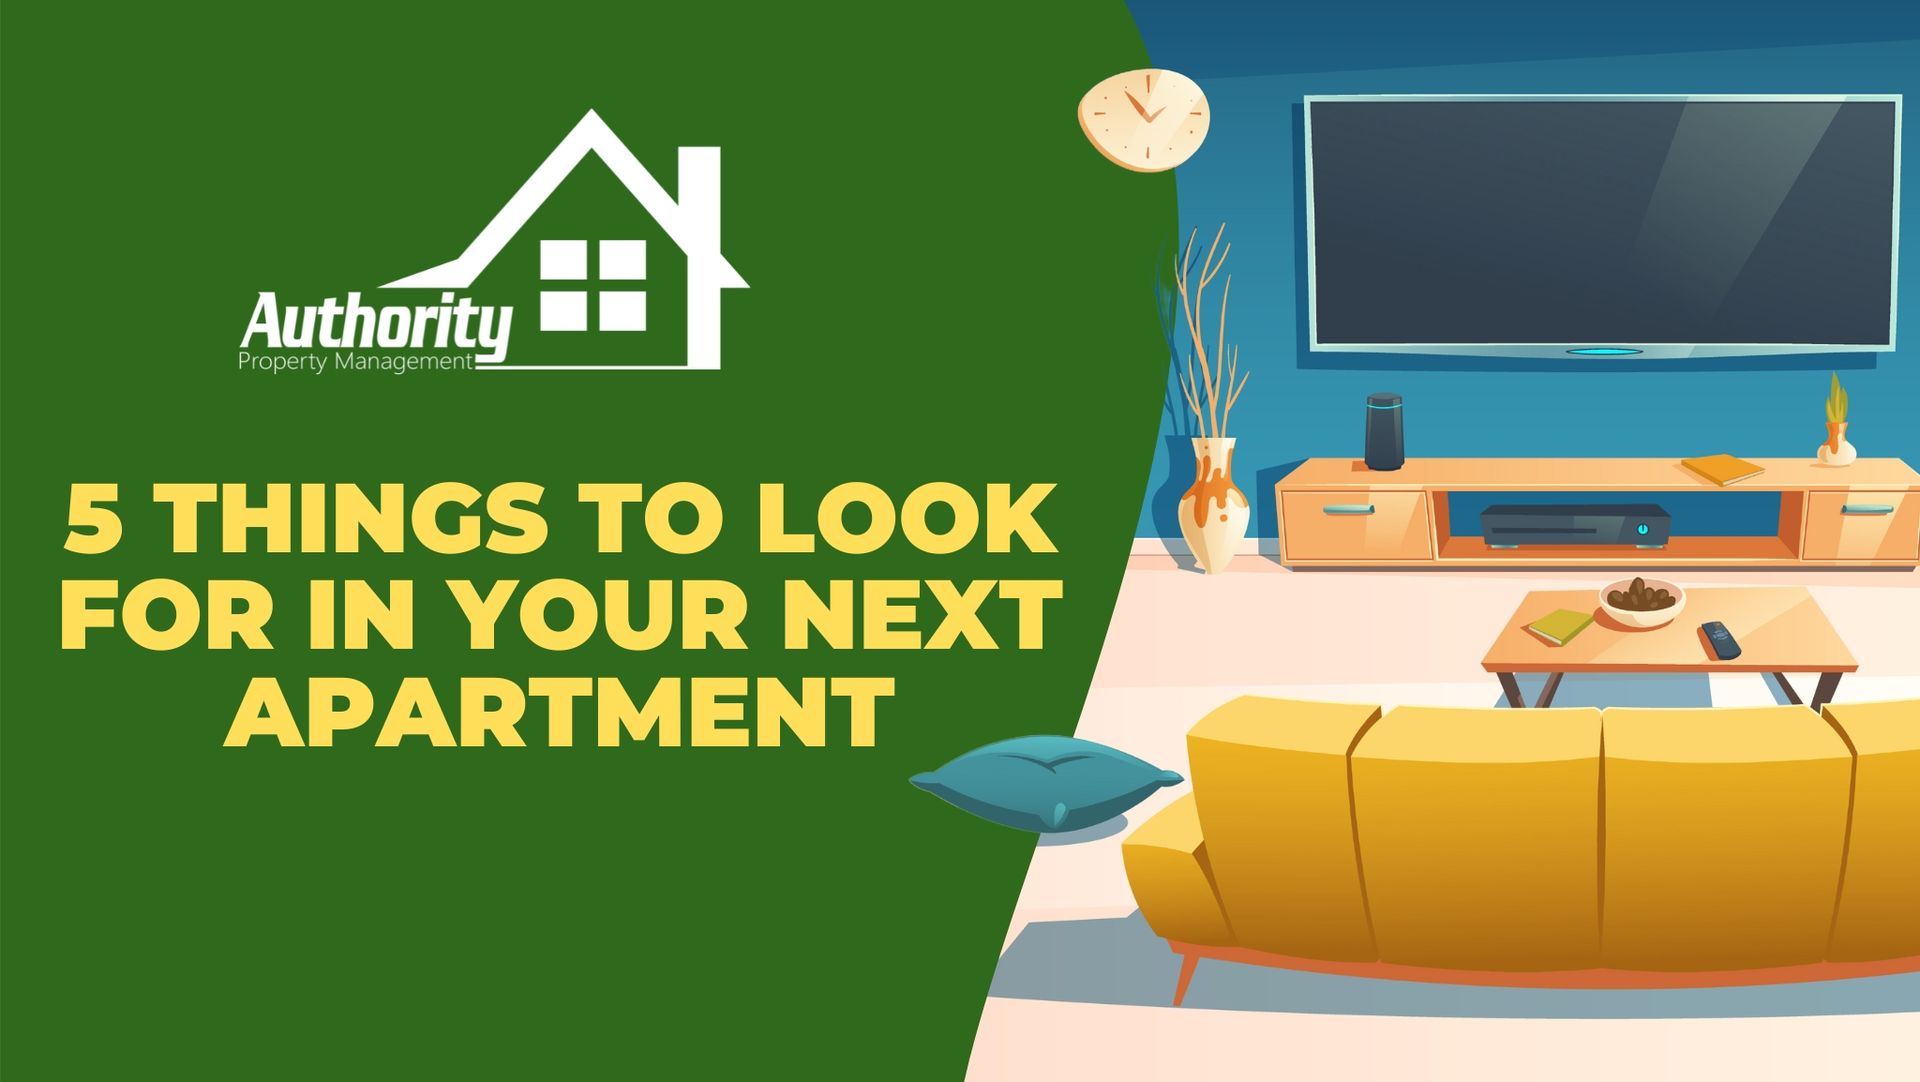 5 Things to Look For in Your Next Apartment